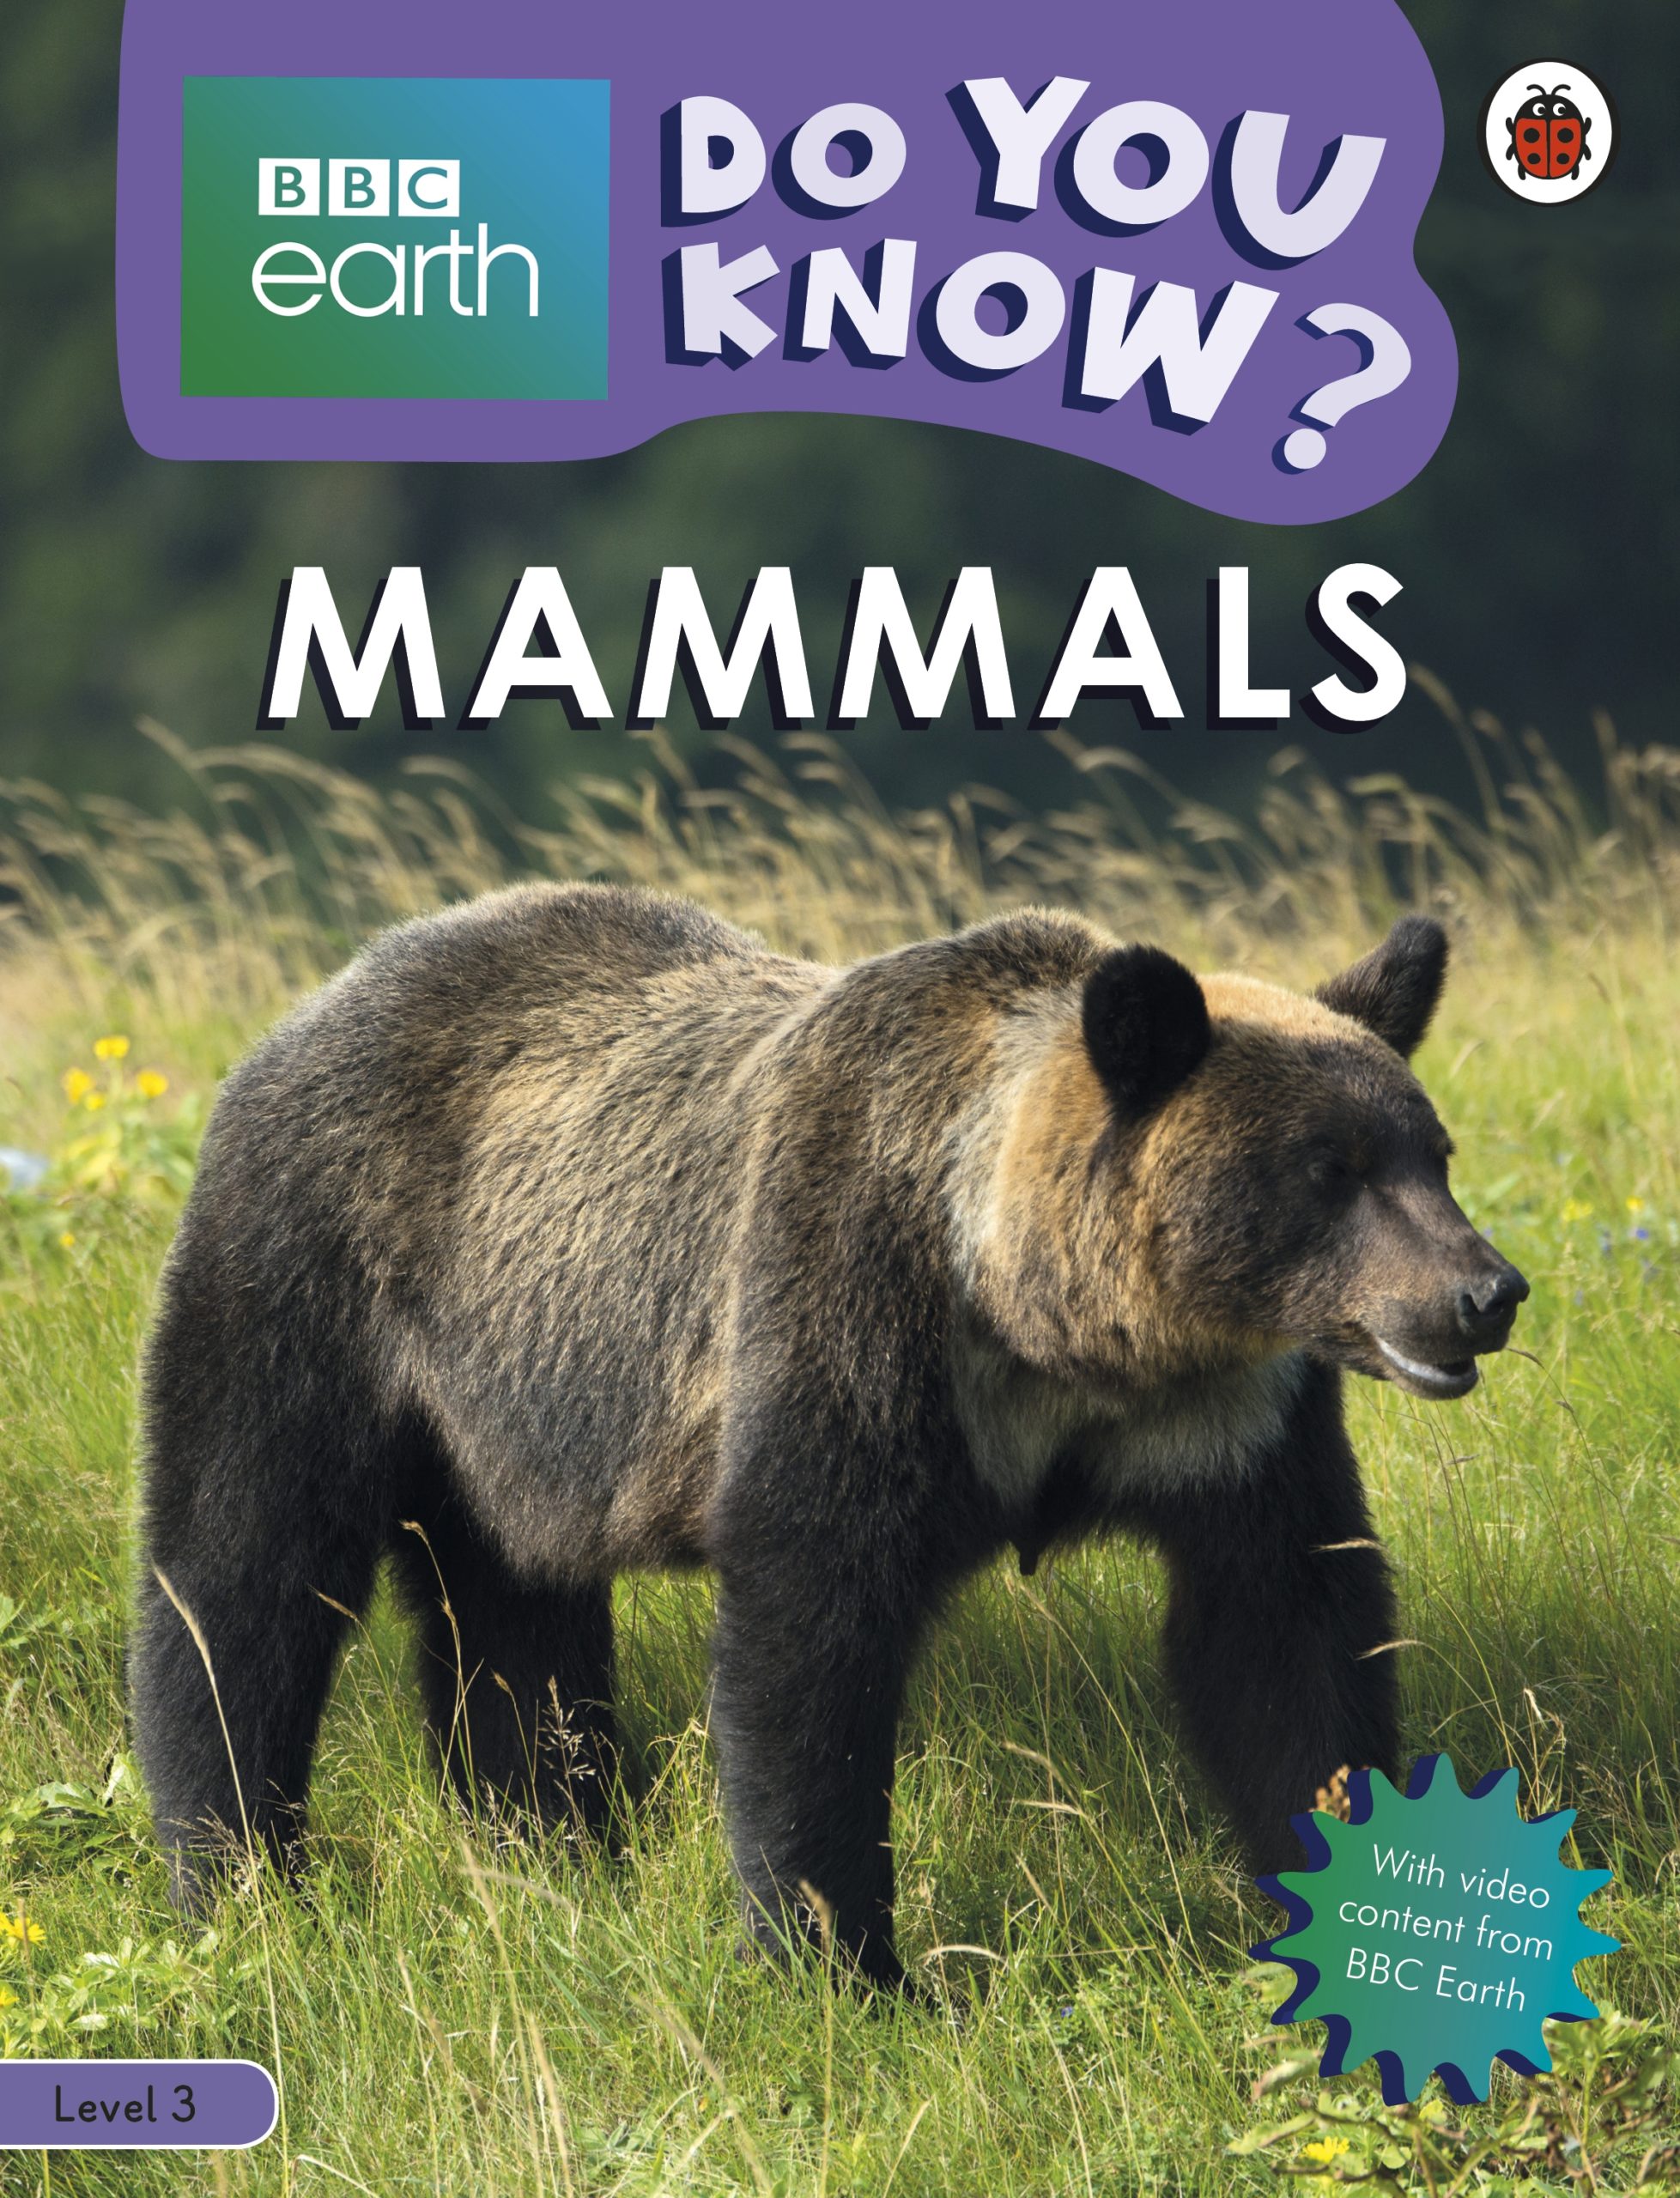 Do You Know? BBC Earth Mammals Ladybird Education